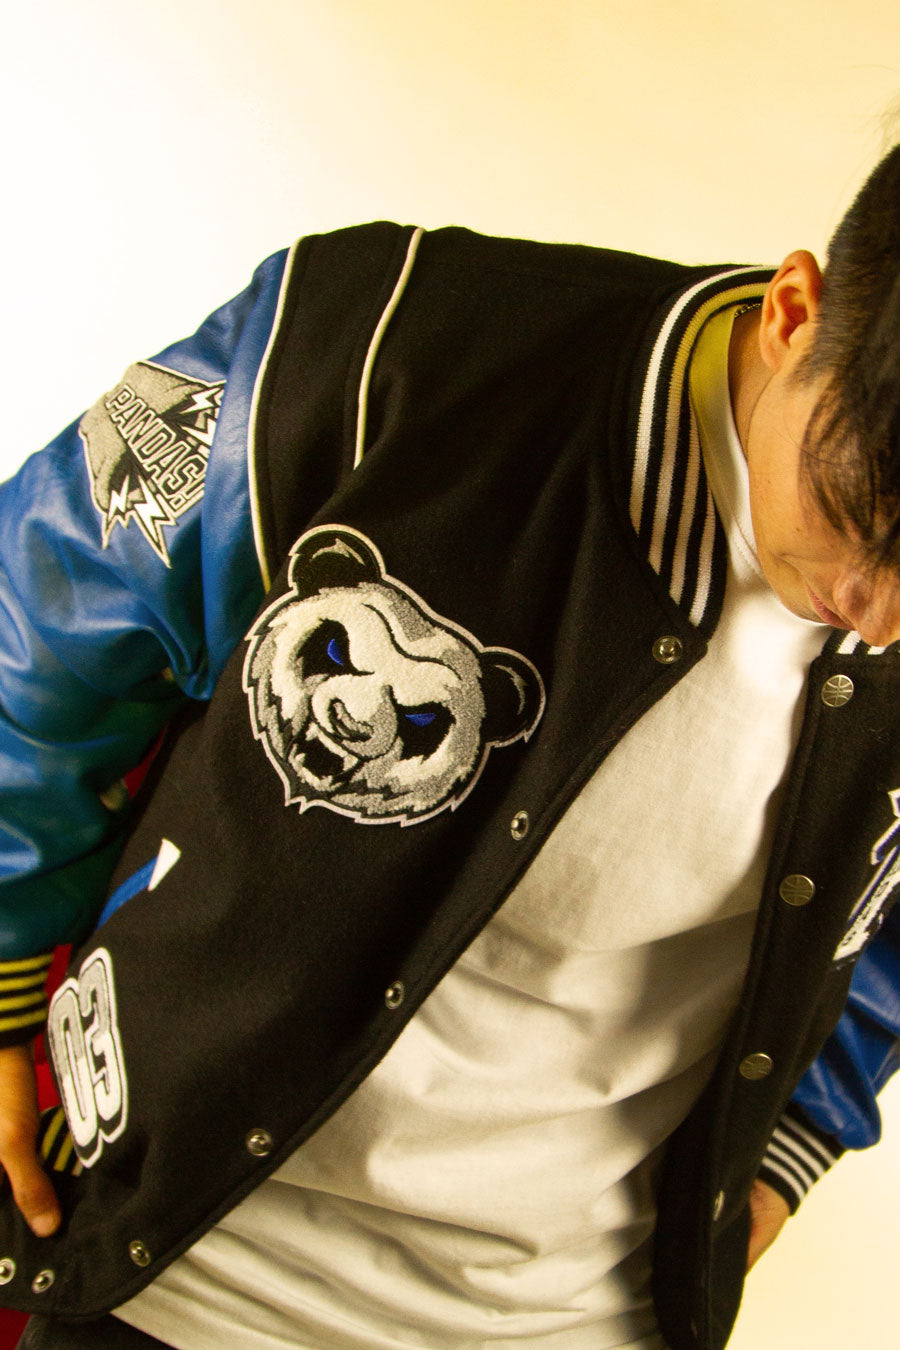 atypical pandas mvp vastity jacket with panda patches, icon of the team and year of foundation of the team worn open match with white t-shirt